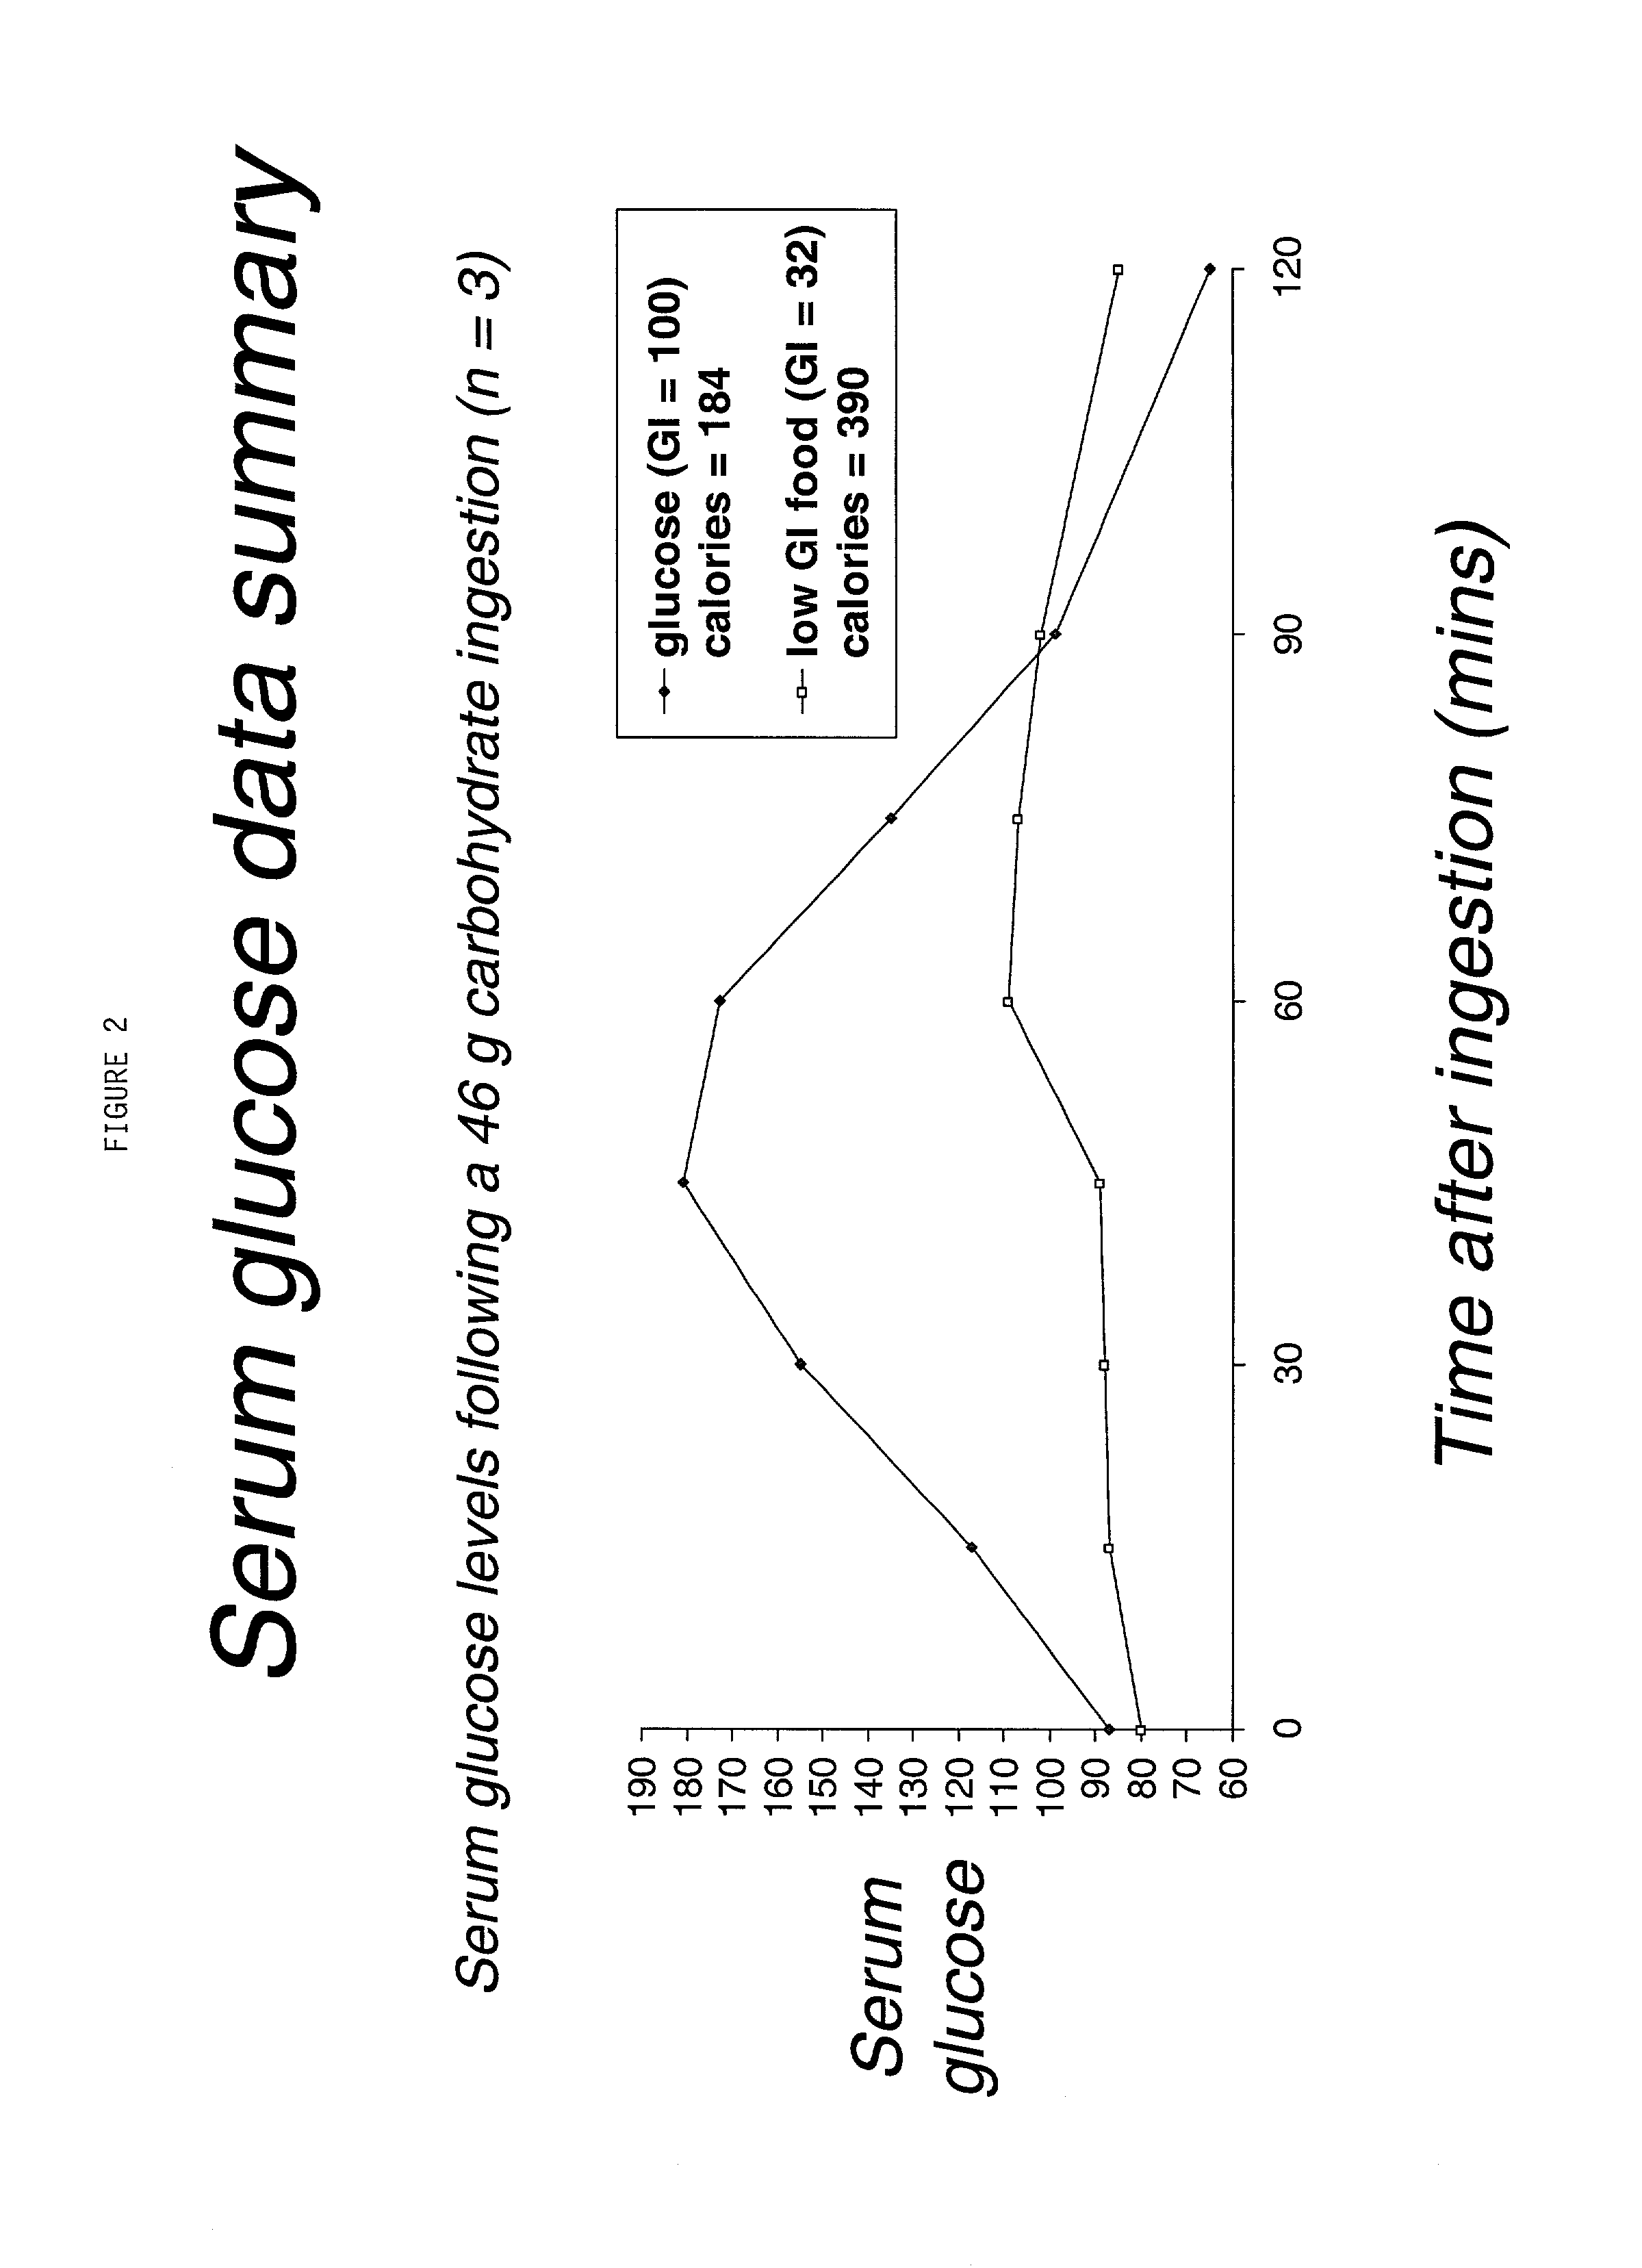 Compositions and methods of carbohydrate dosing